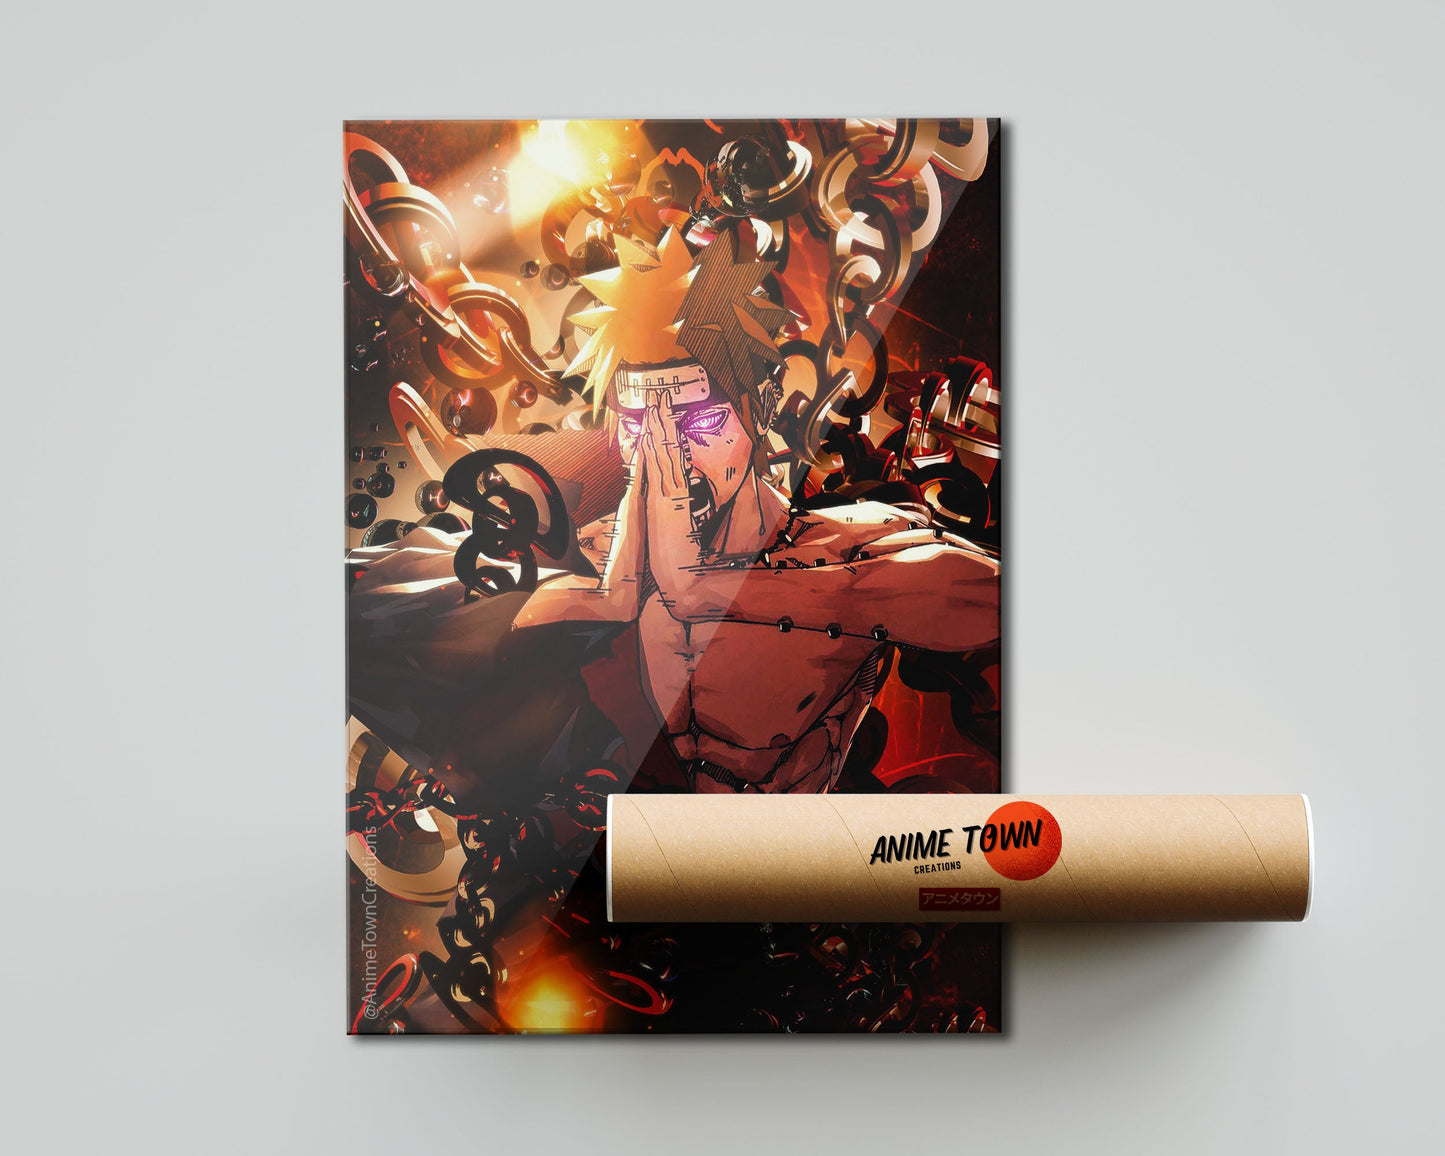 Anime Town Creations Poster Naruto Pain Almighty Push 5" x 7" Home Goods - Anime Naruto Poster